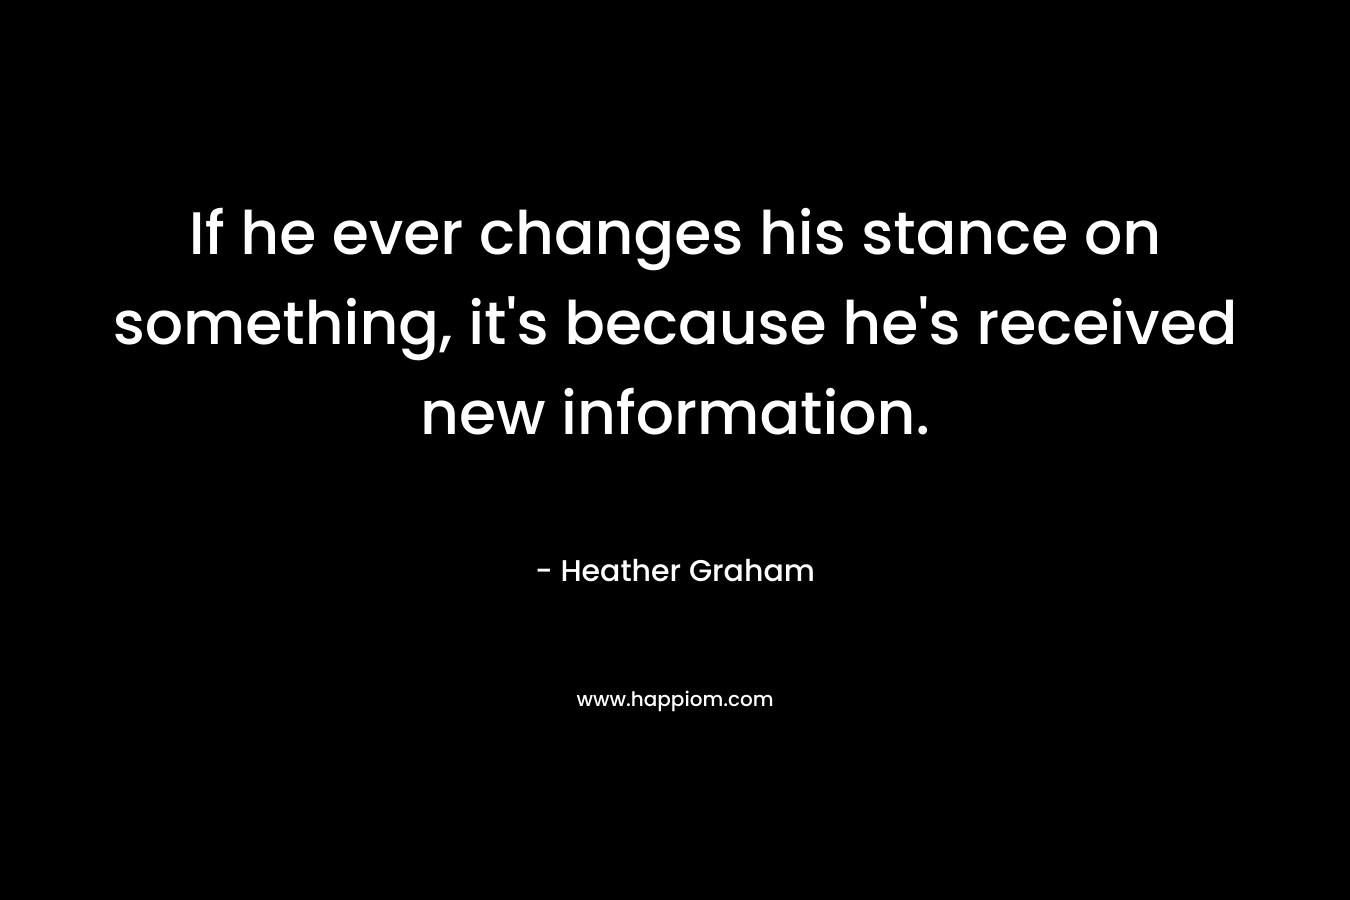 If he ever changes his stance on something, it's because he's received new information.